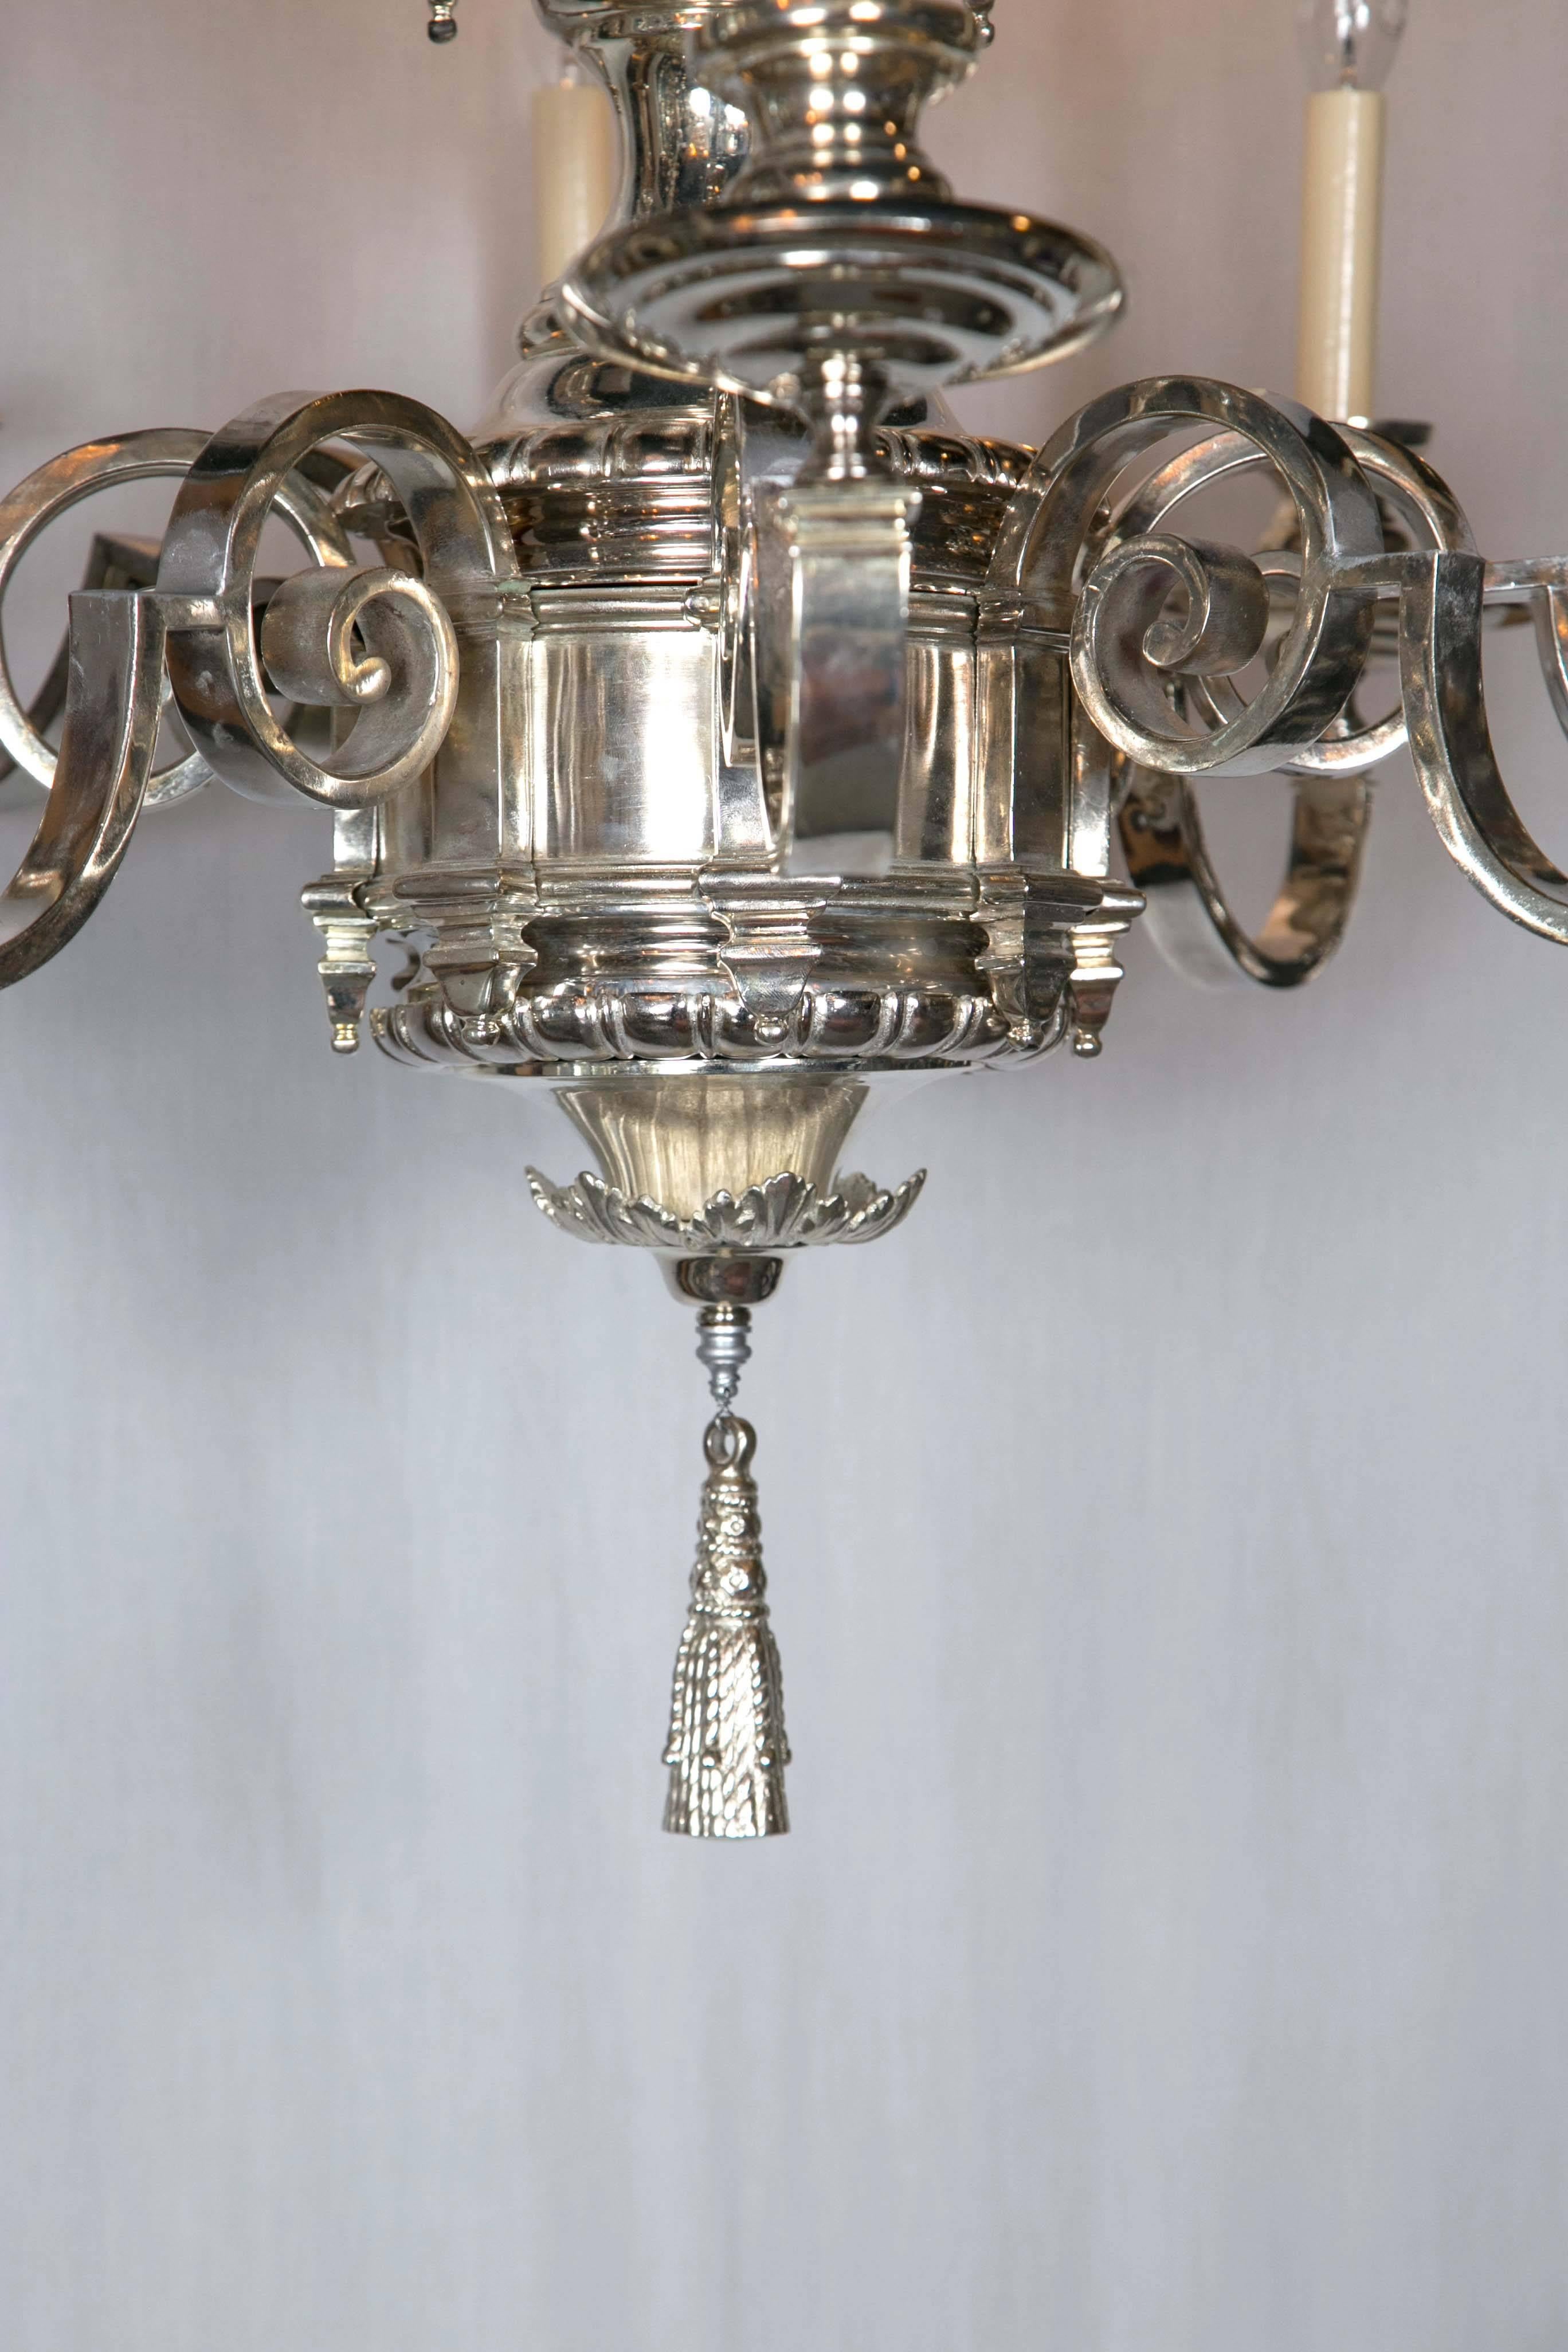 Beautiful silver plated twelve-light chandelier with cherubs at top, neoclassical style Caldwell. Two available priced per fixture.